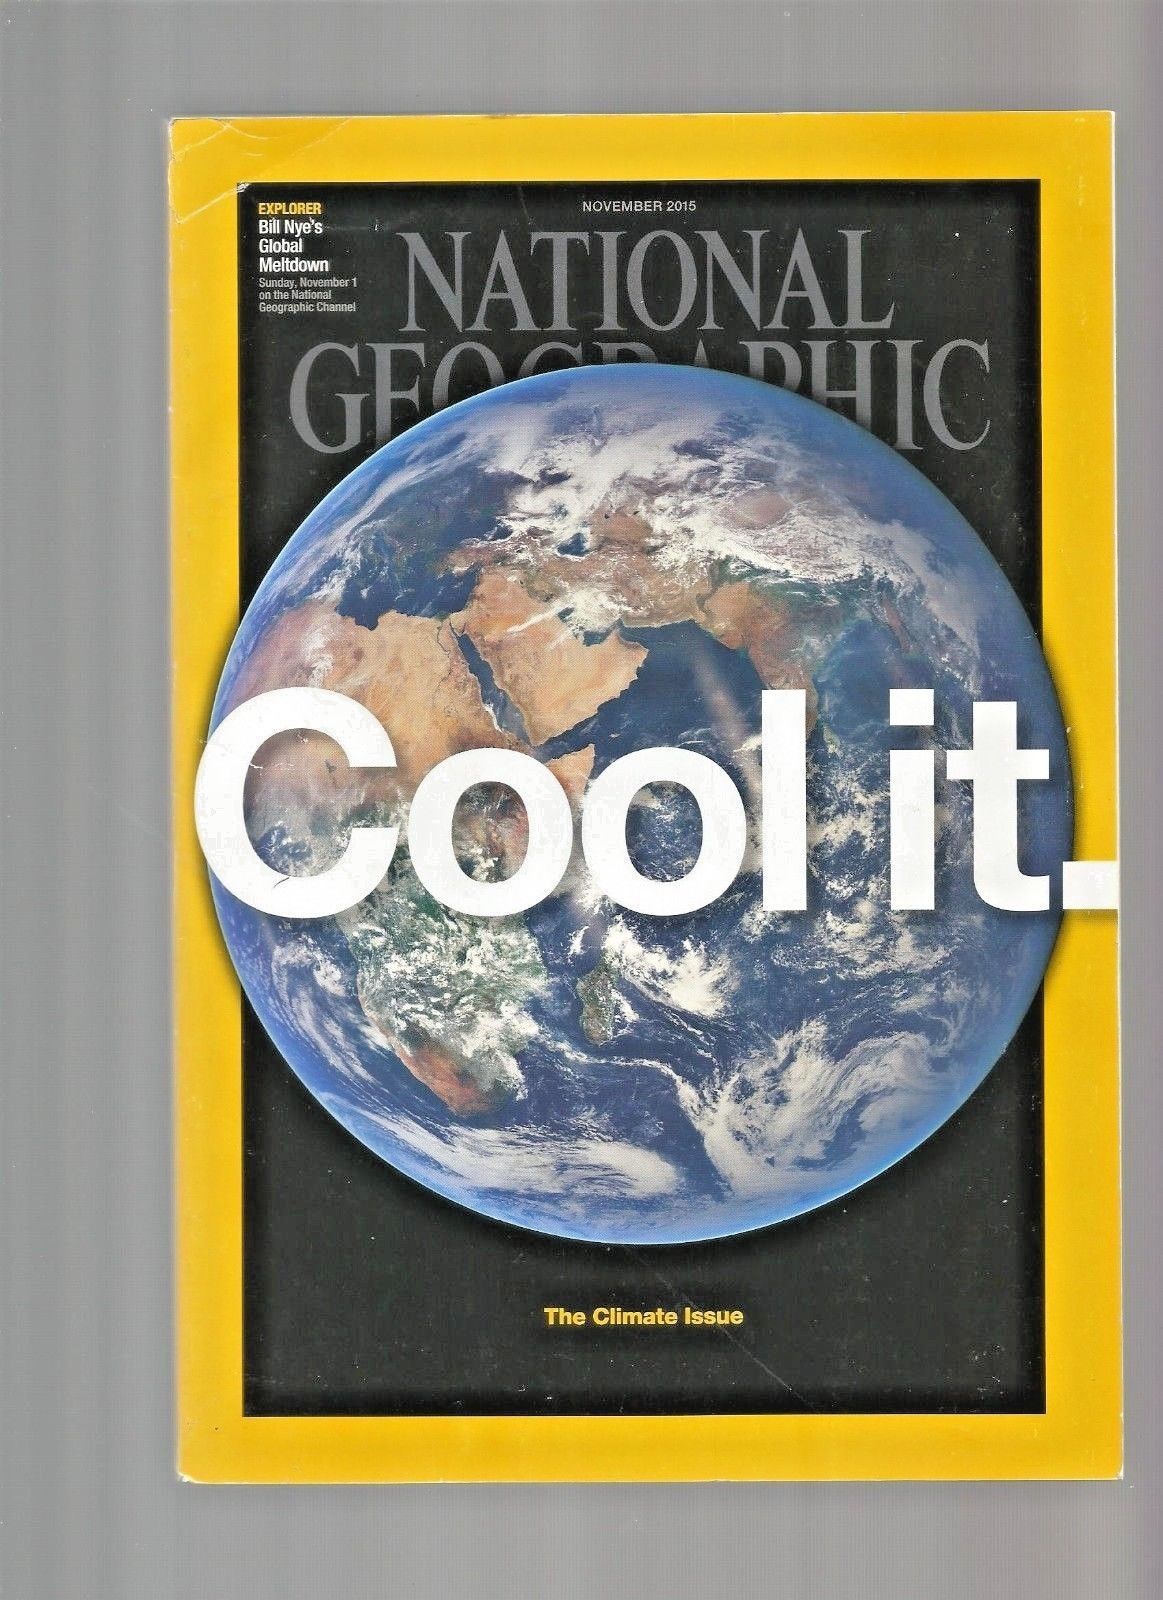 National Geographic magazine back issue November 2015 Special - $4.85